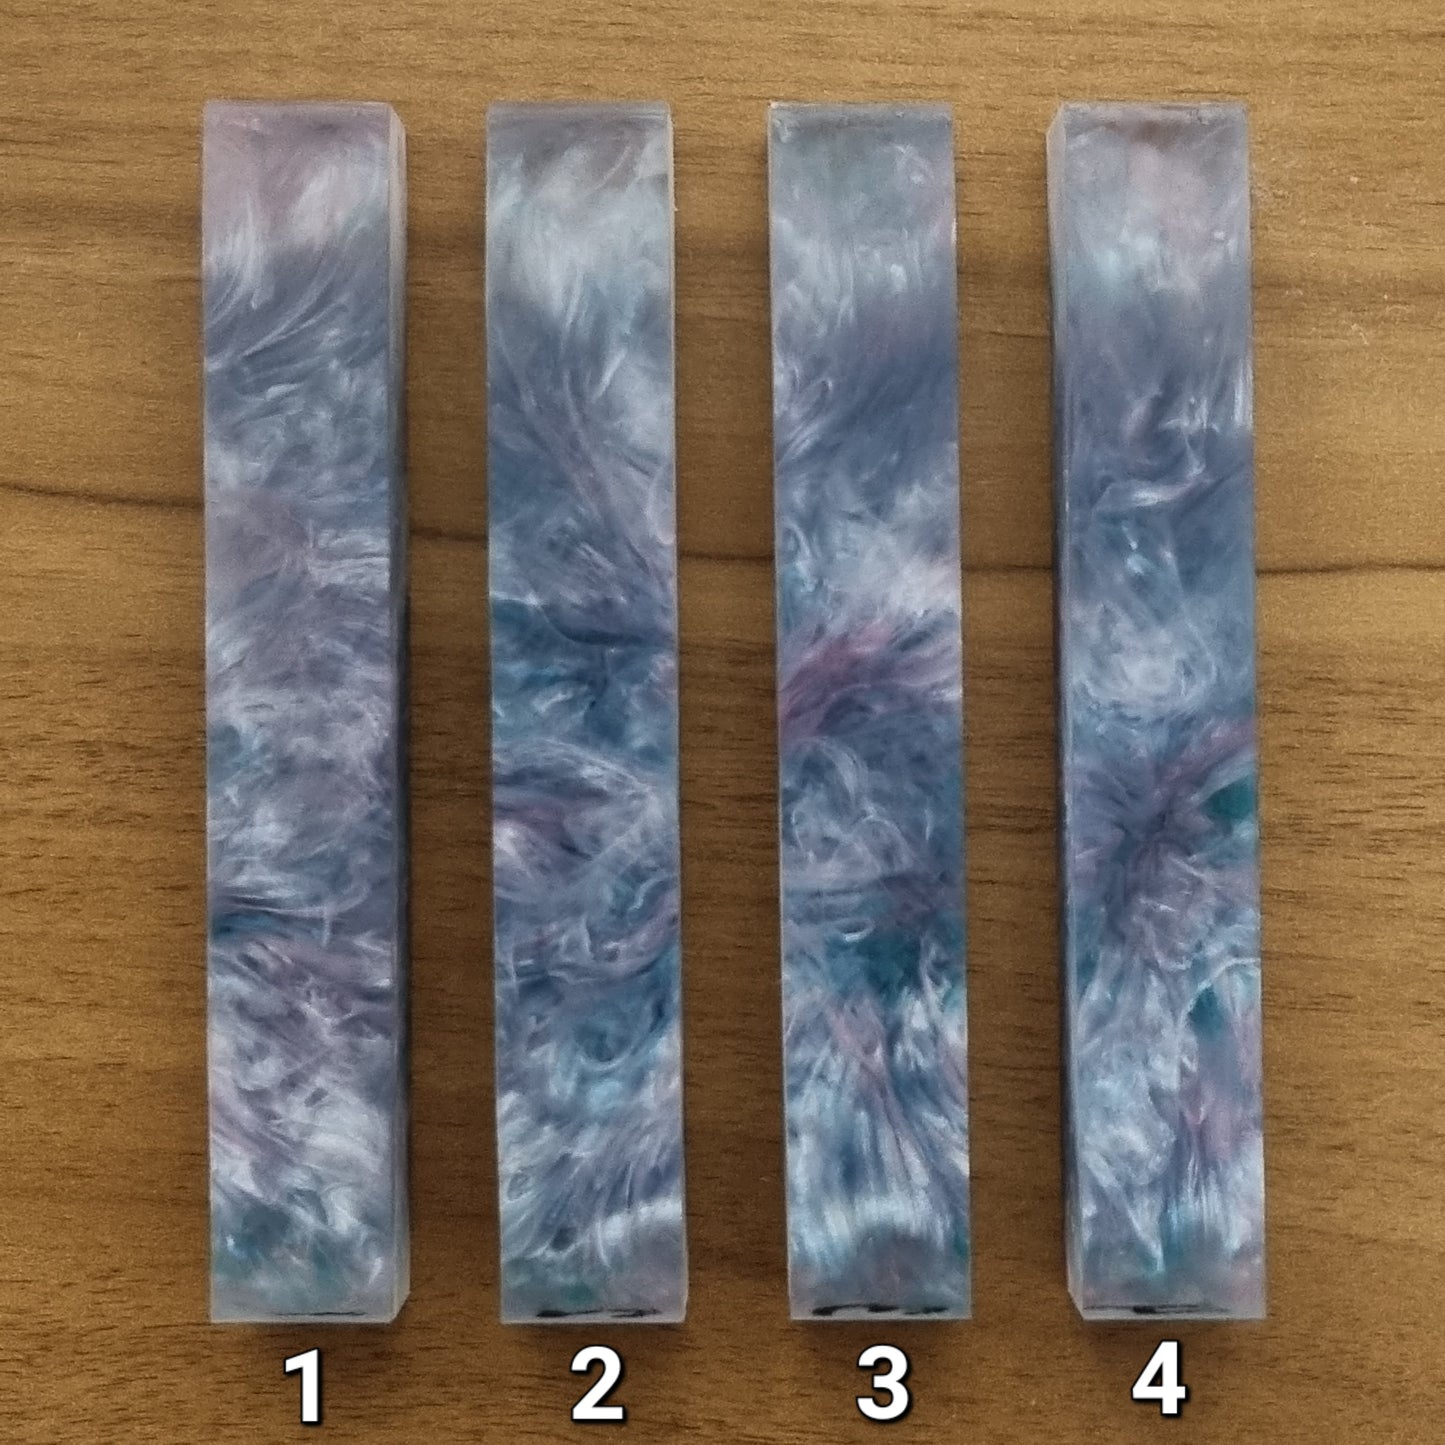 Pen Blanks with Teal, Pink, White and Clear Resin